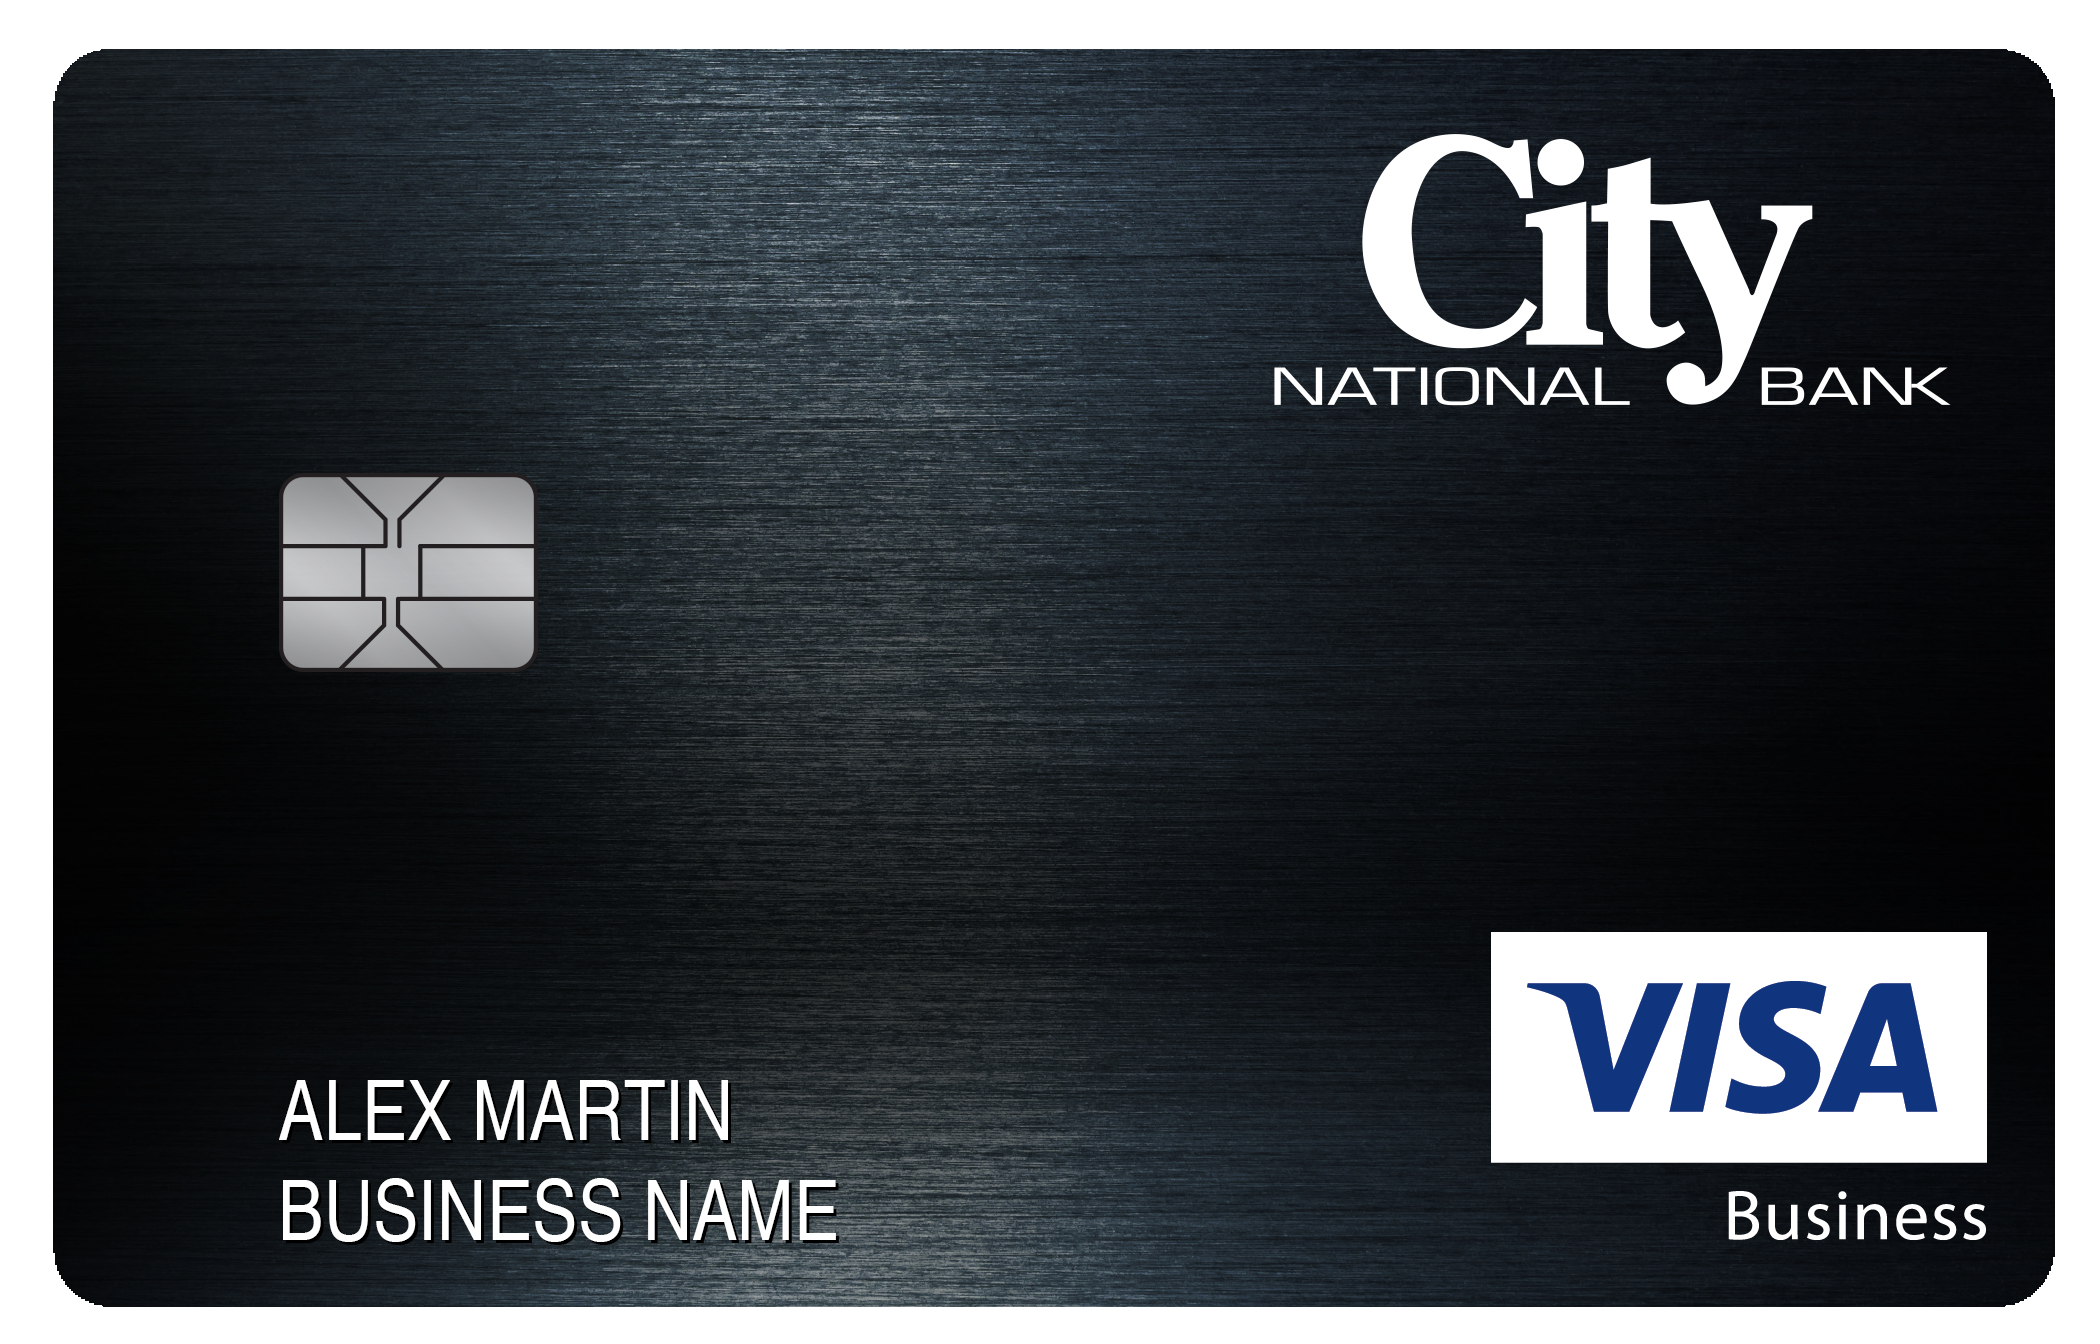 City National Bank Business Cash Preferred Card